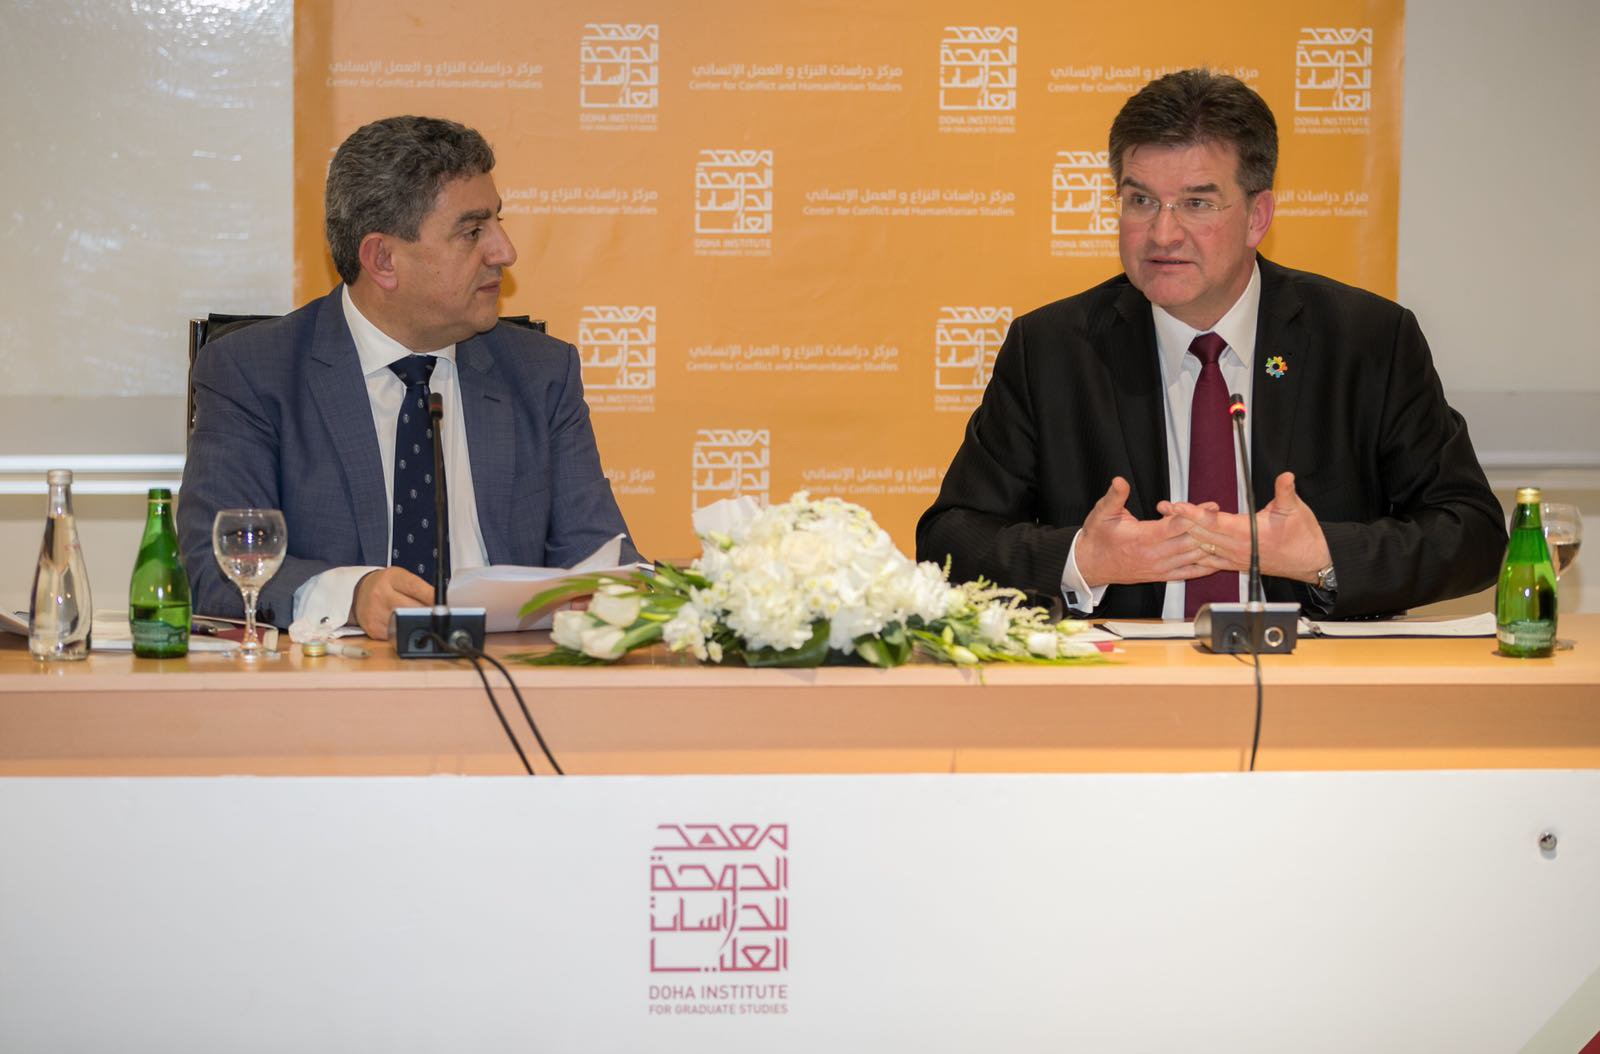 chairman of the UN General Assembly's 72nd session, Miroslav Lajcak Speaking in a lecture at Doha Institute for Graduate Studies